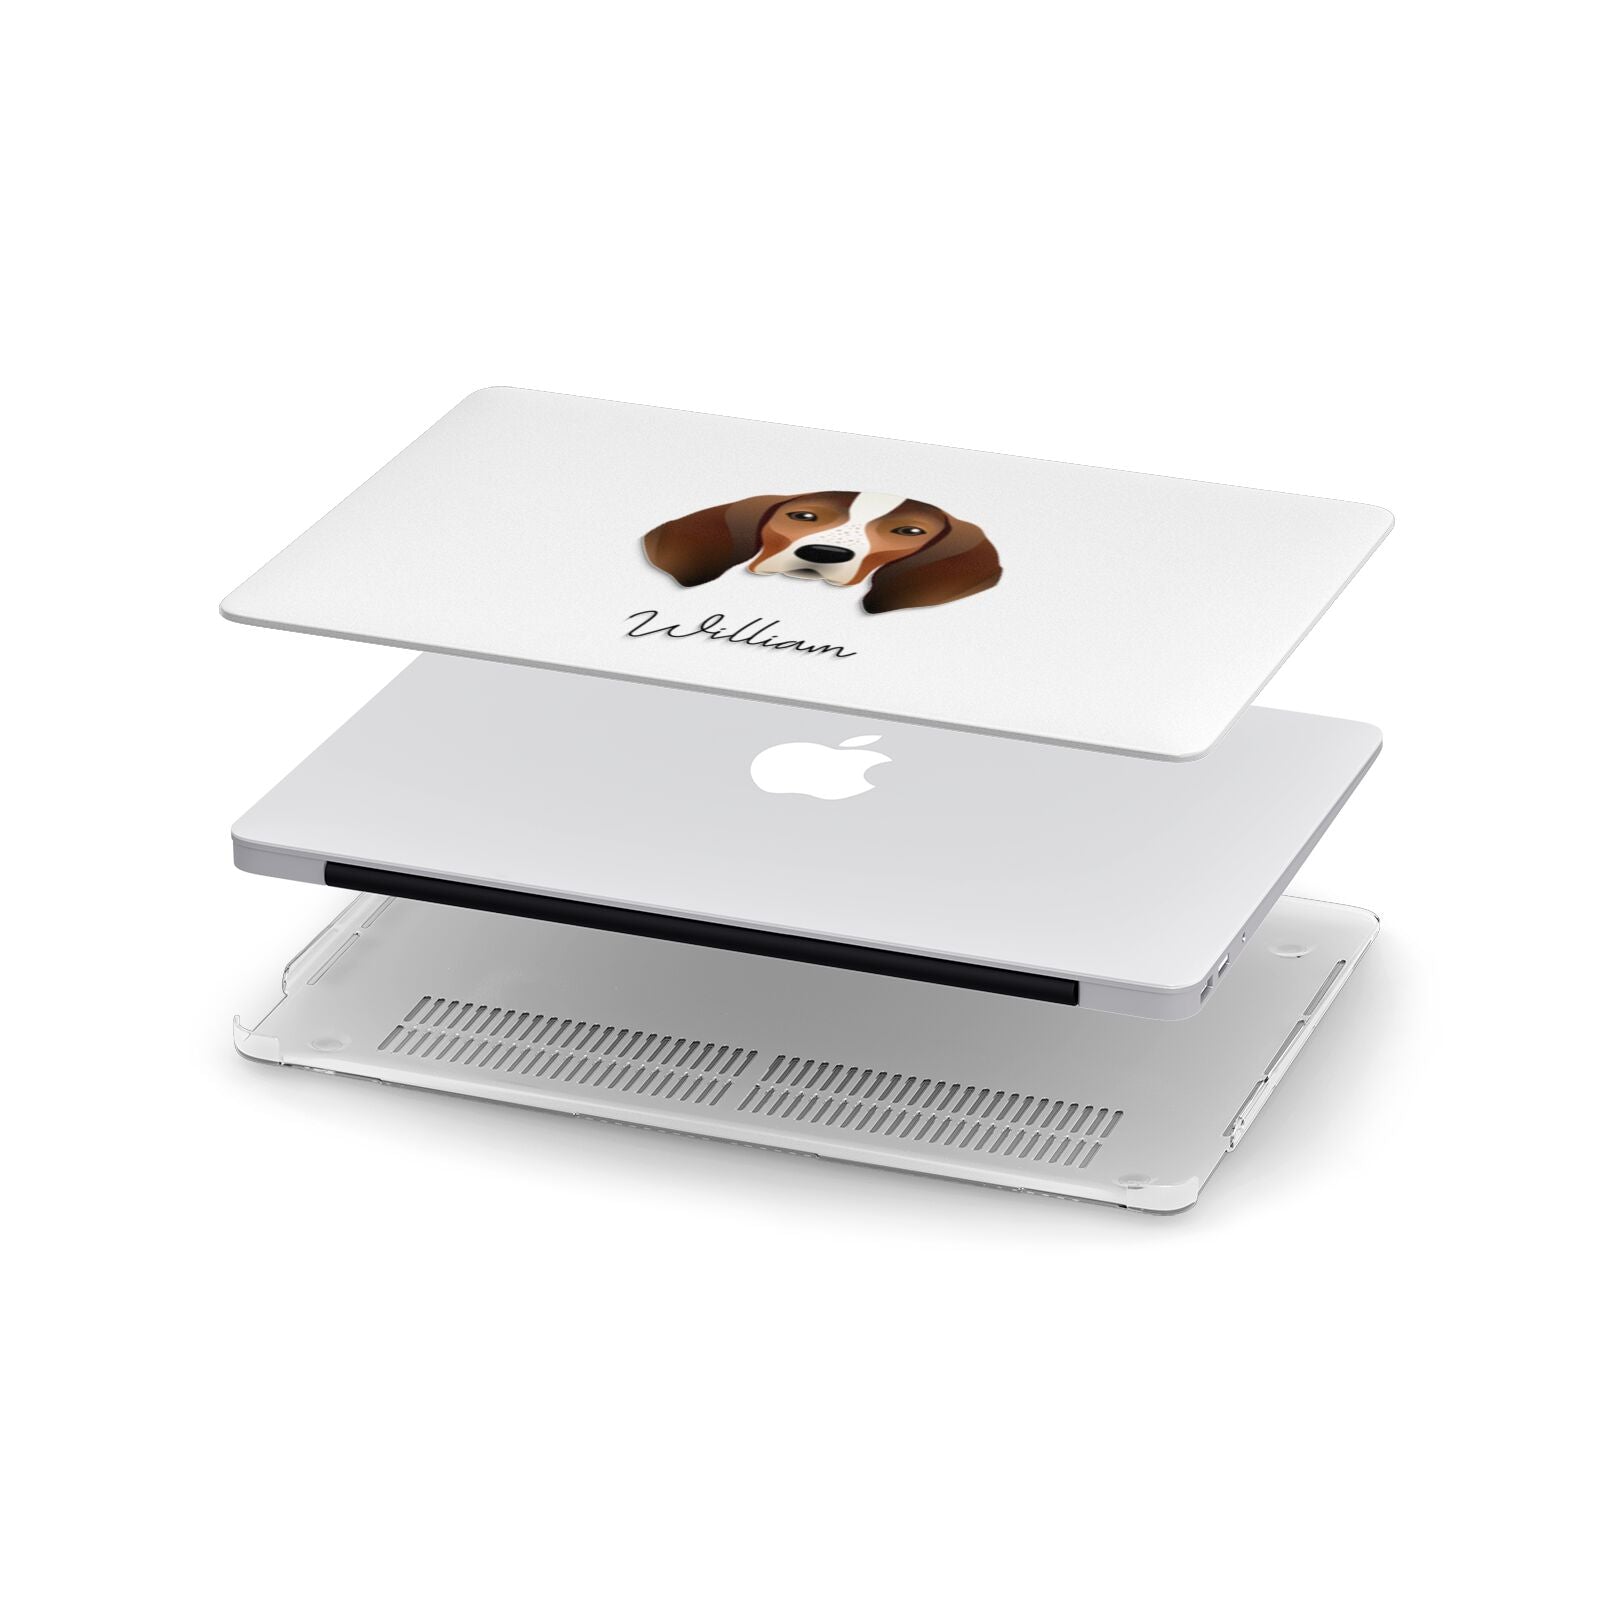 English Coonhound Personalised Apple MacBook Case in Detail